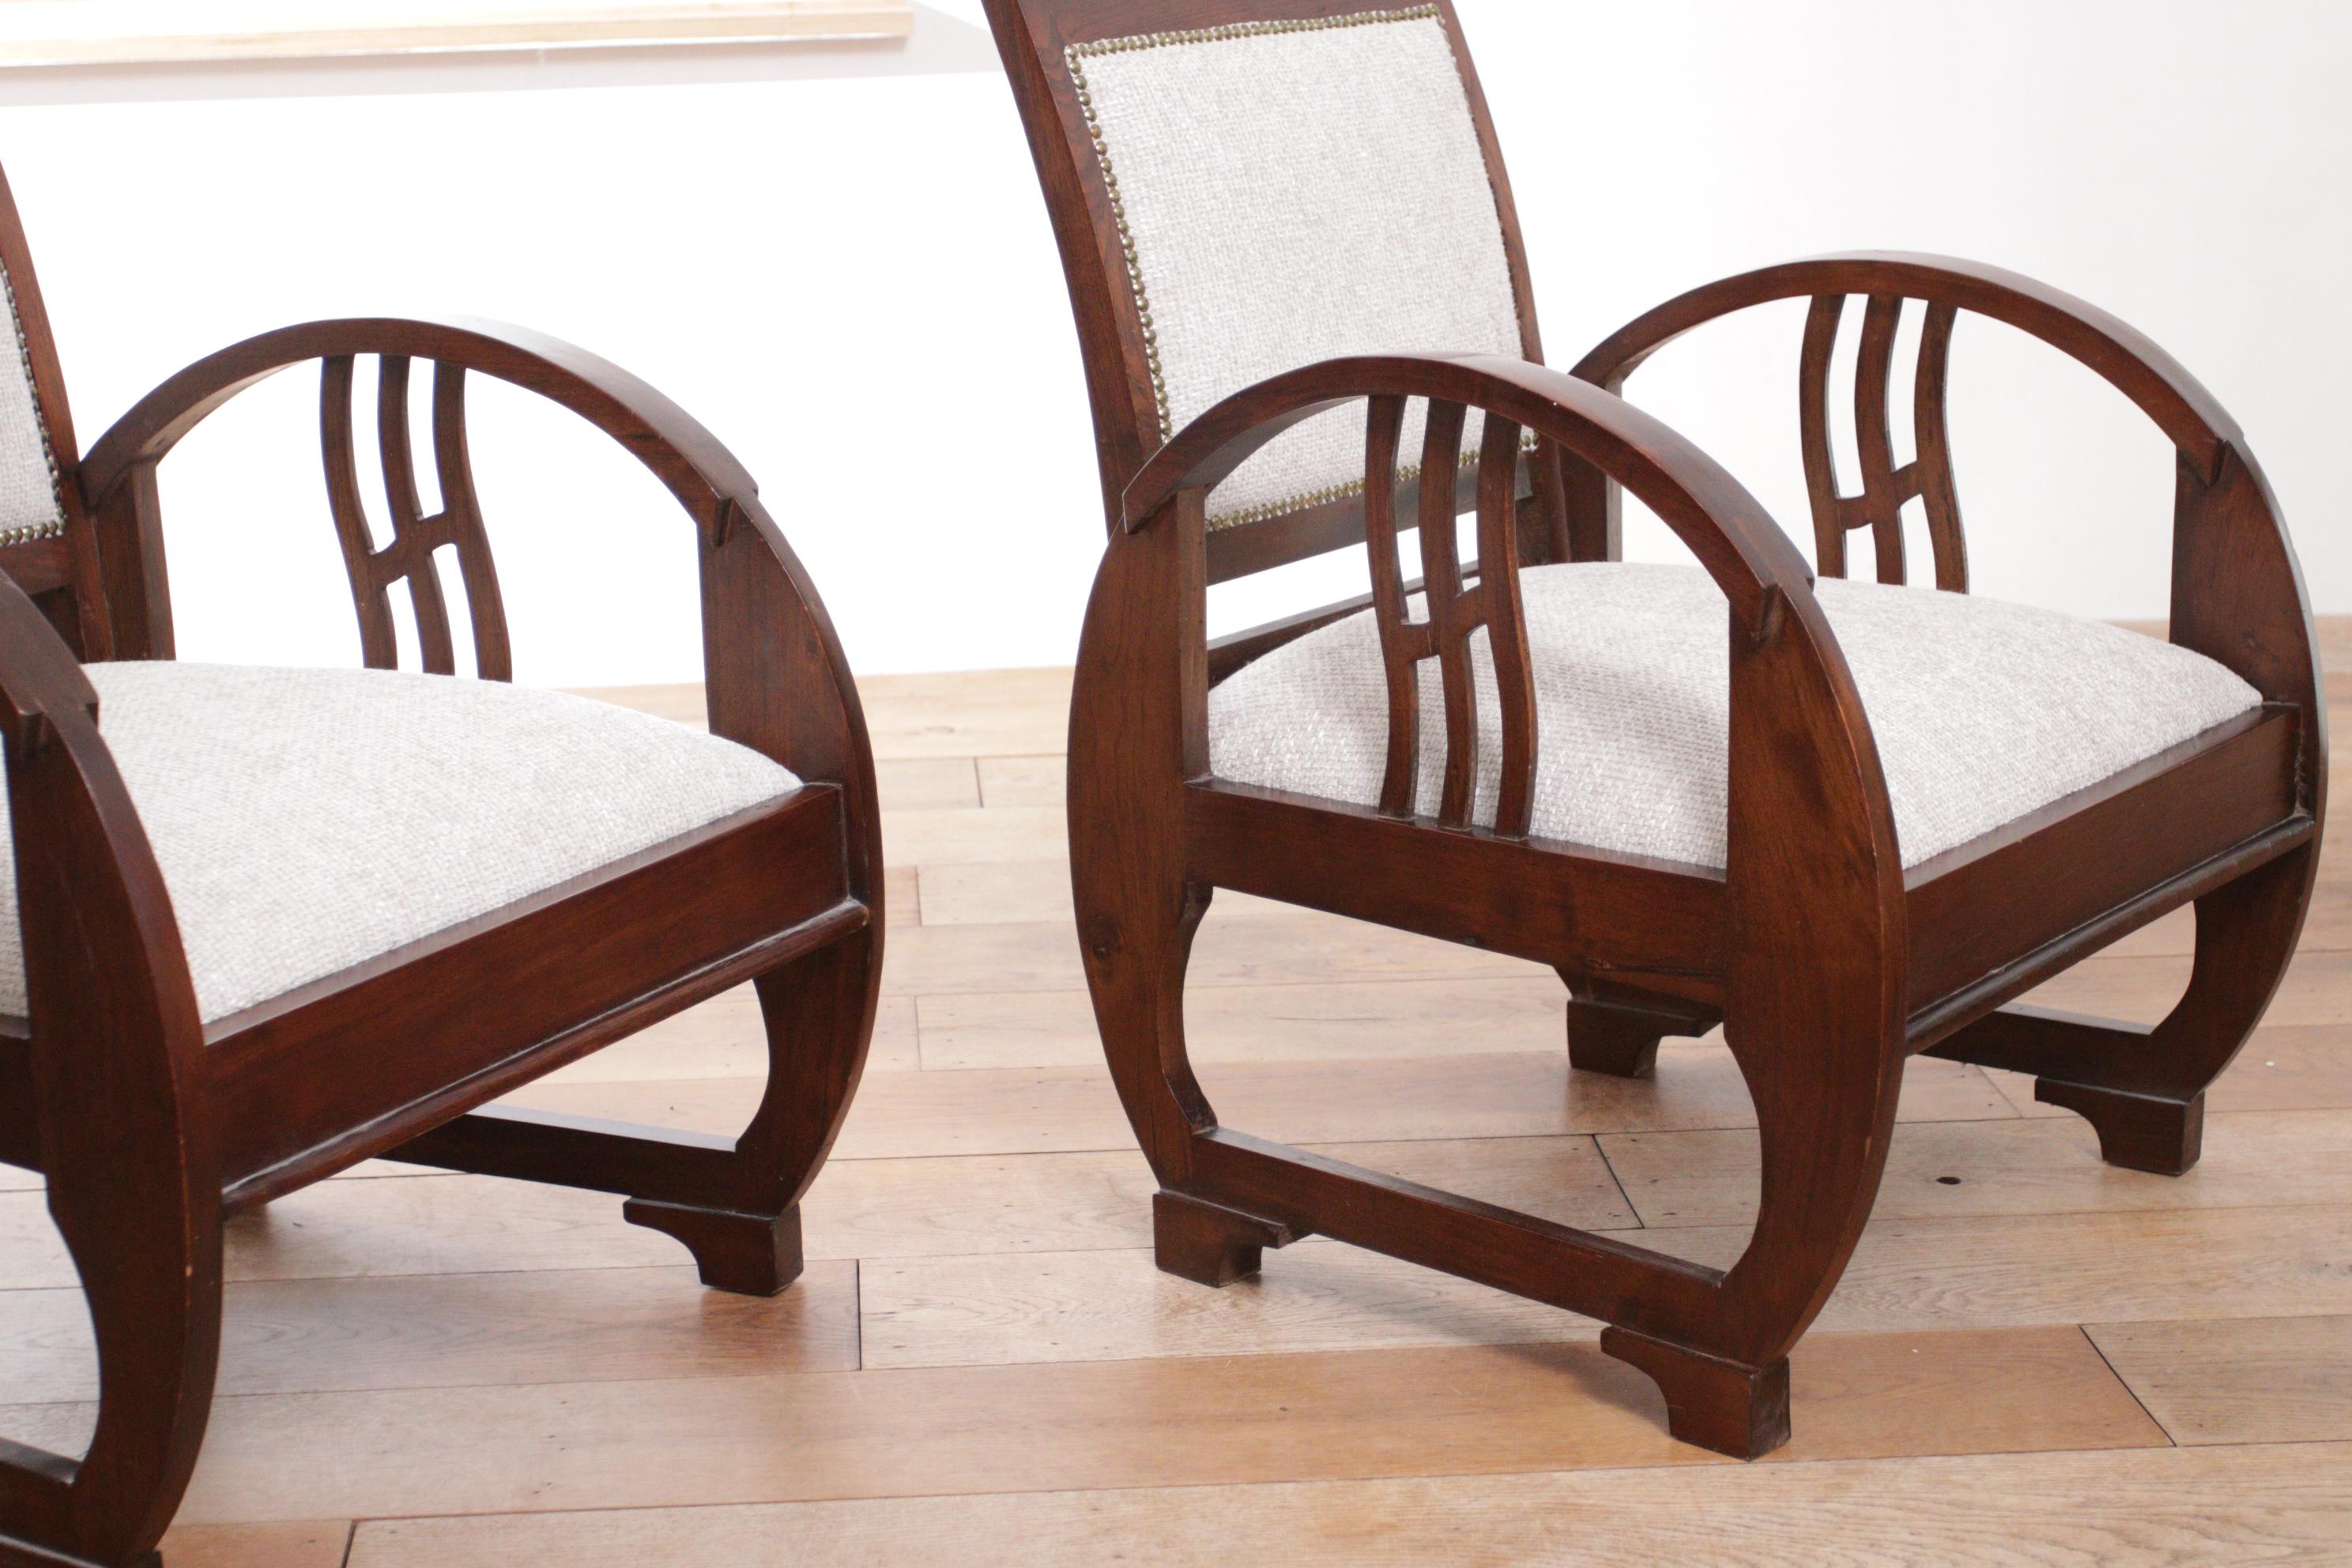 Two Rare Exclusive Elegant Art Deco Vintage French Wooden Armchairs 1930's 11